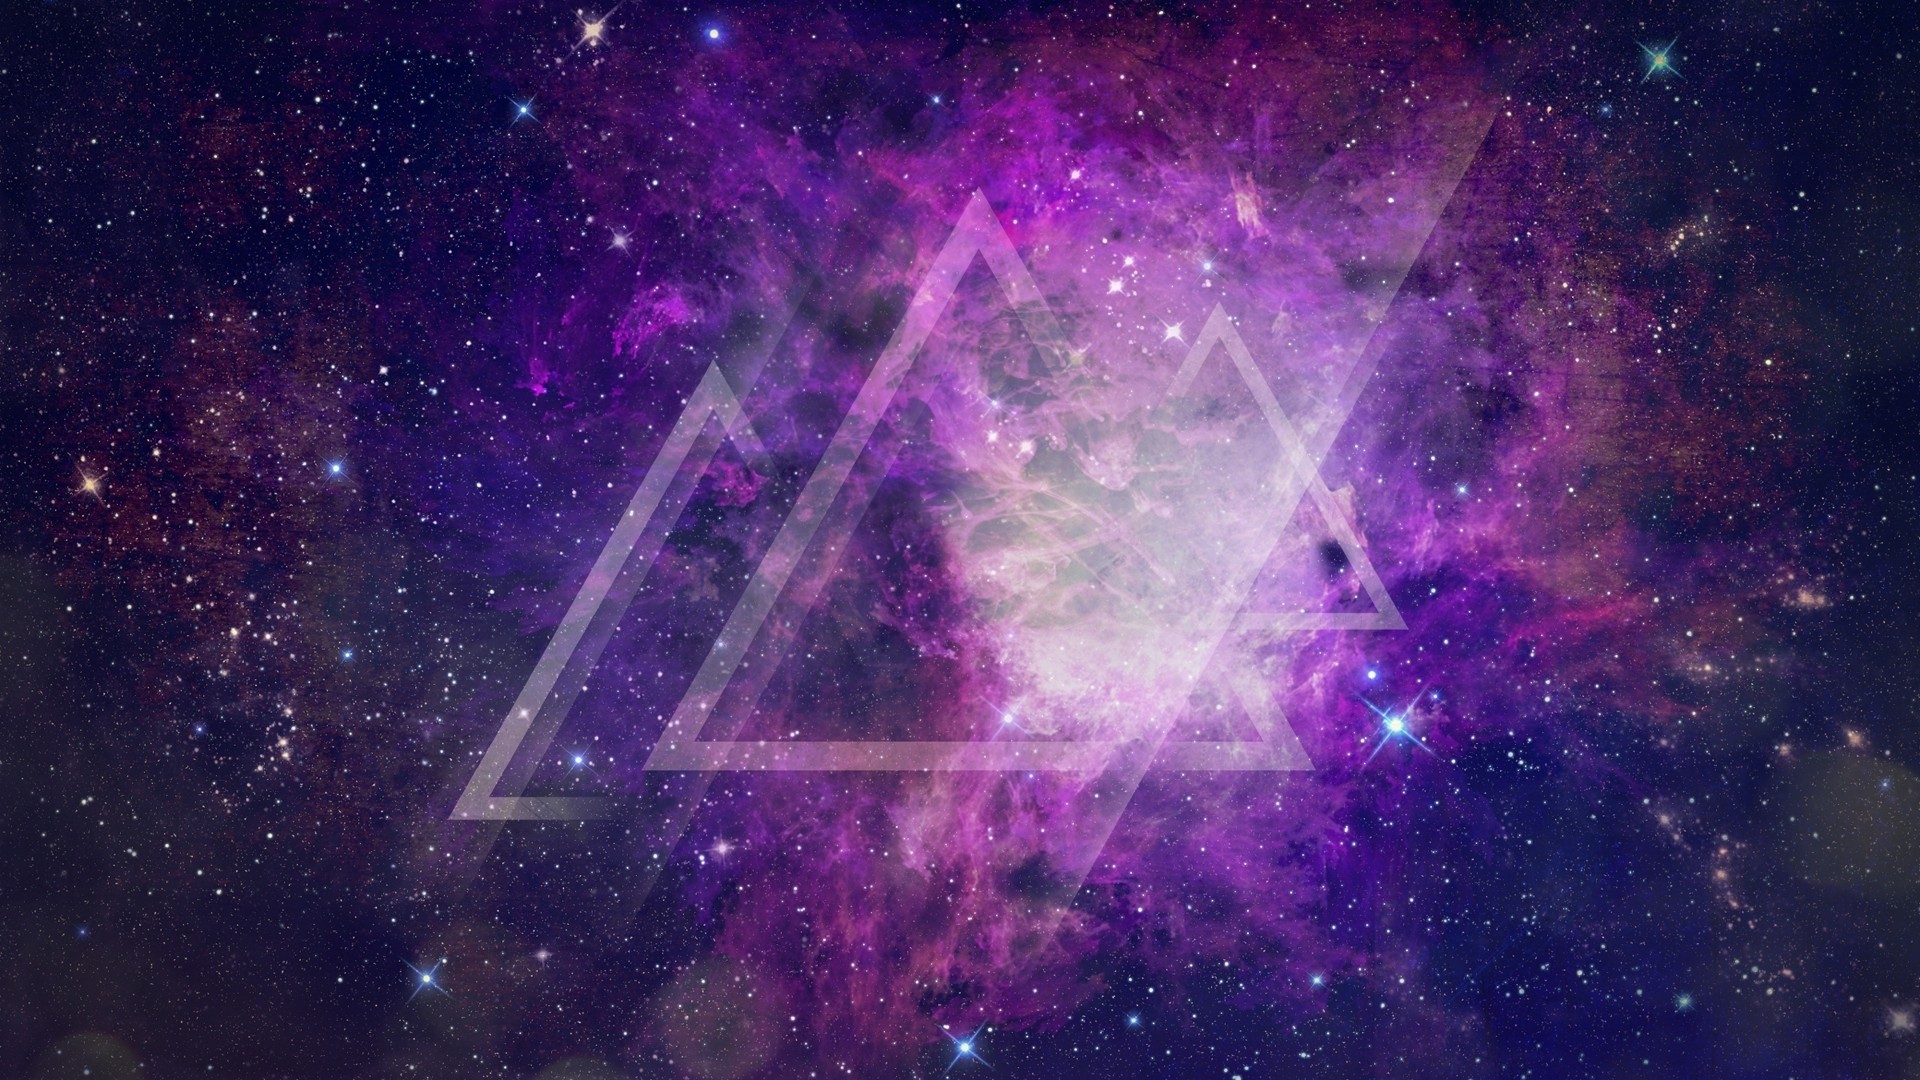 1920x1080 galaxy wallpaper 8 Cool Wallpaper, picture, image or photo